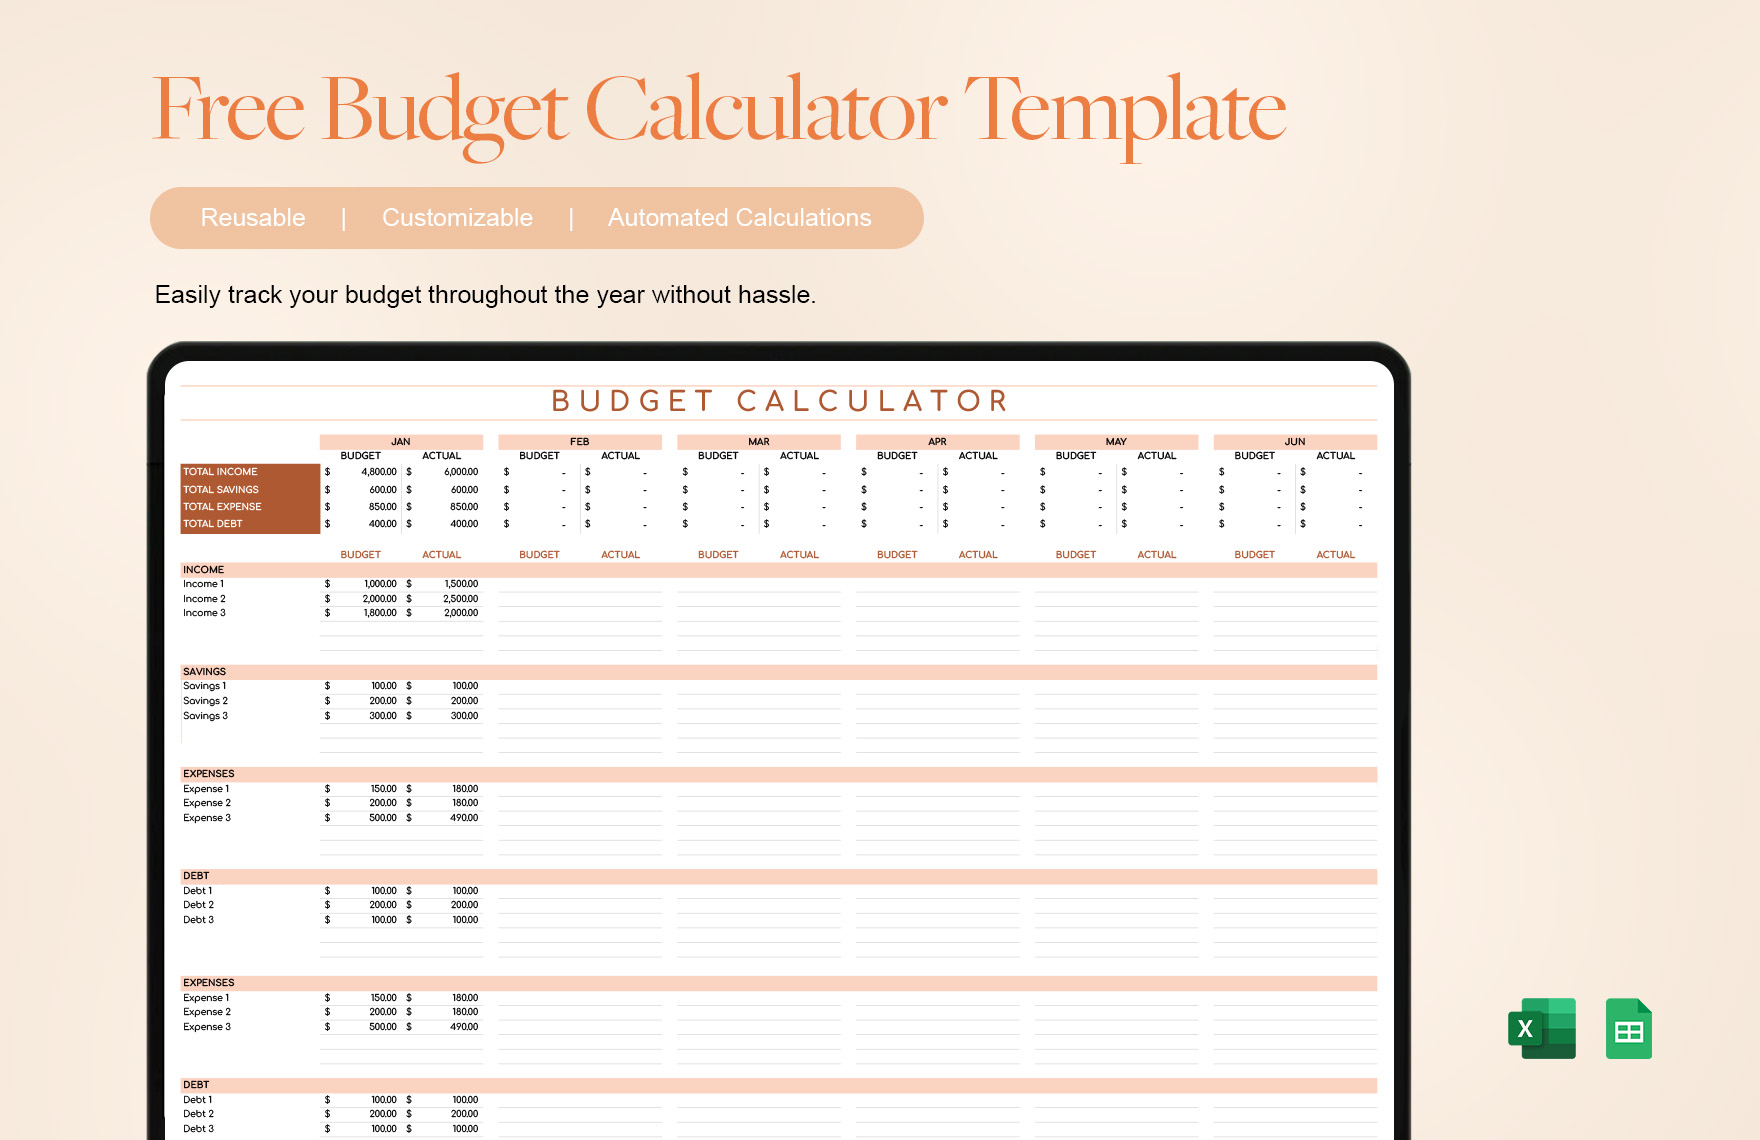 Free Budget Calculator Template in Excel, Google Sheets